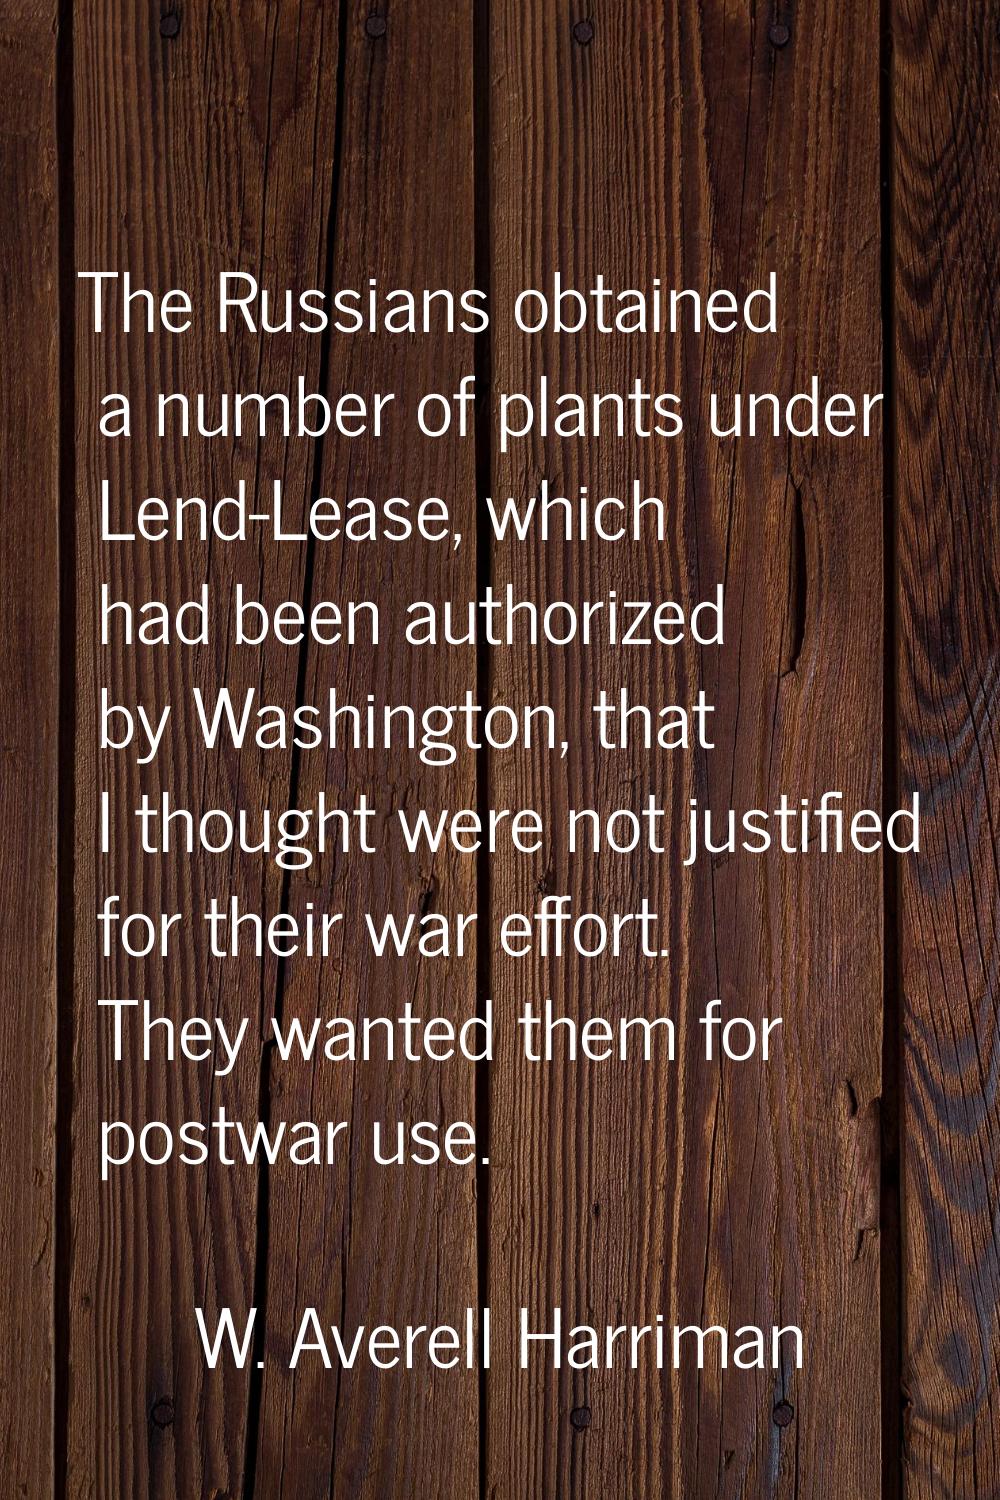 The Russians obtained a number of plants under Lend-Lease, which had been authorized by Washington,